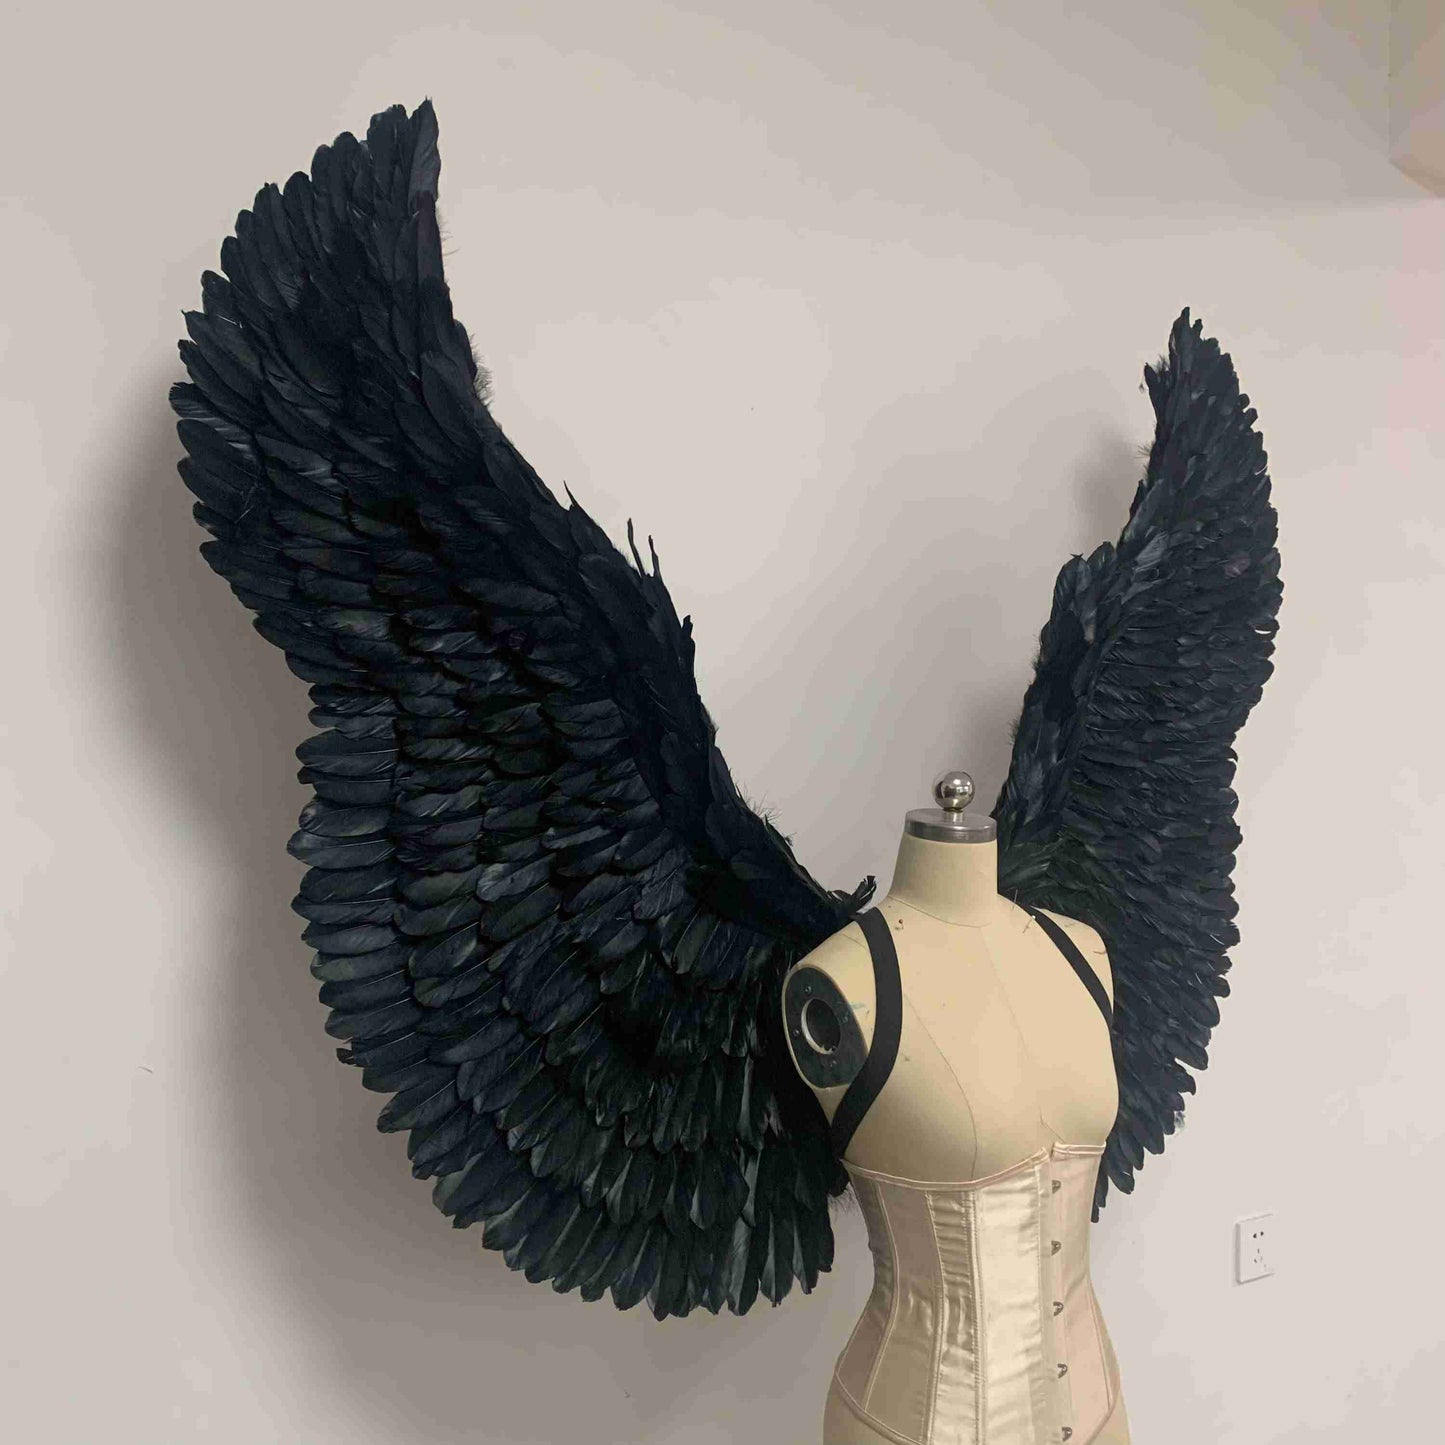 Our black color devil wings from the right side. Made from goose feathers. Wings for the devil or angel costume. Suitable for photoshoots.